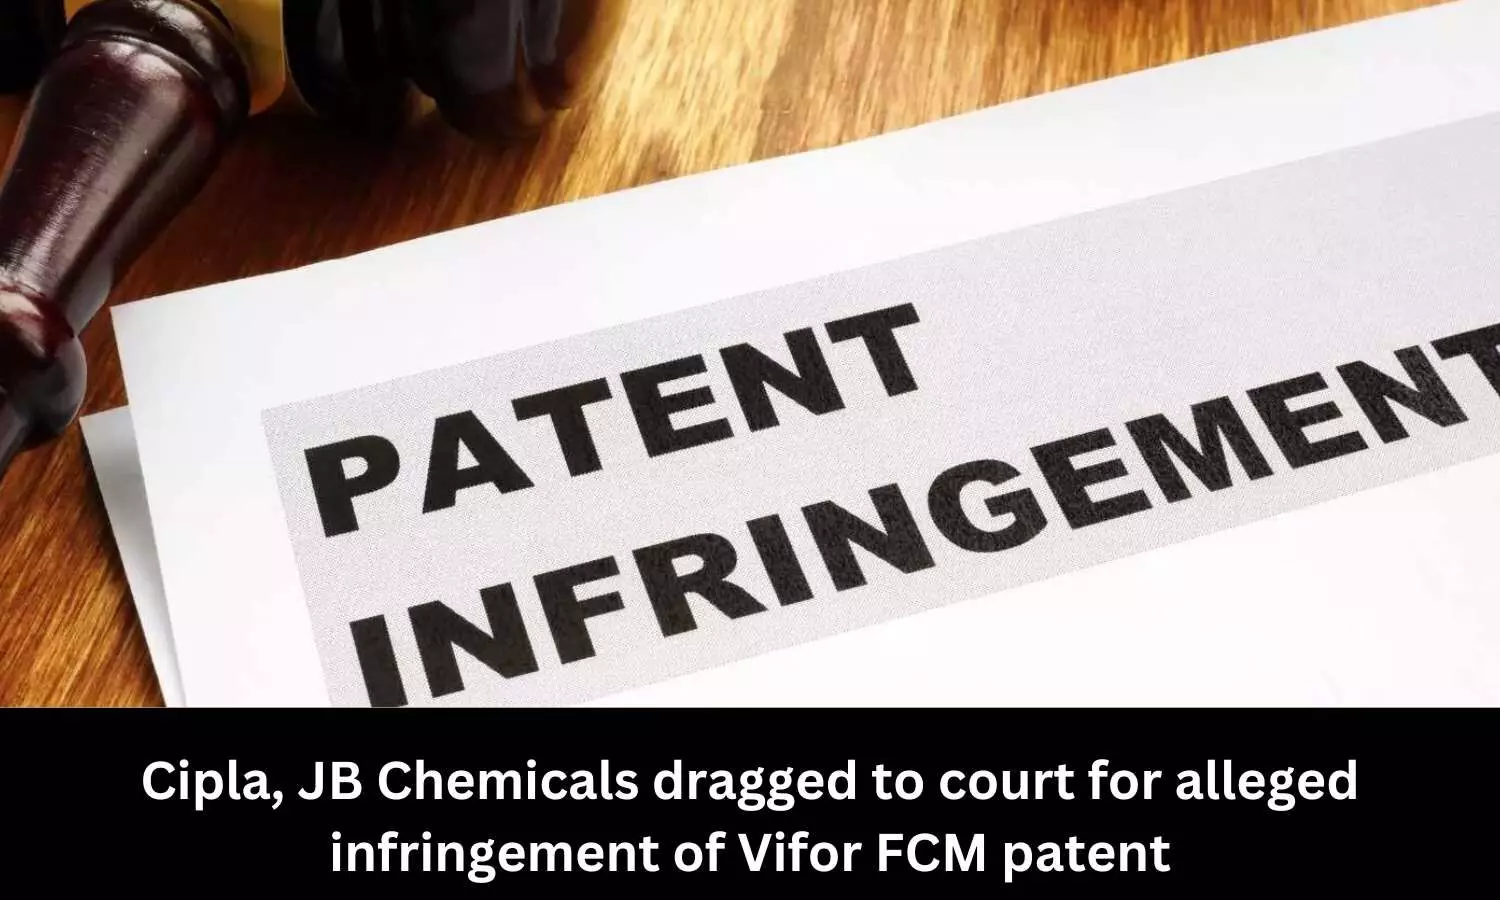 JB Chemicals, Cipla dragged to court for alleged infringement of Vifor FCM patent